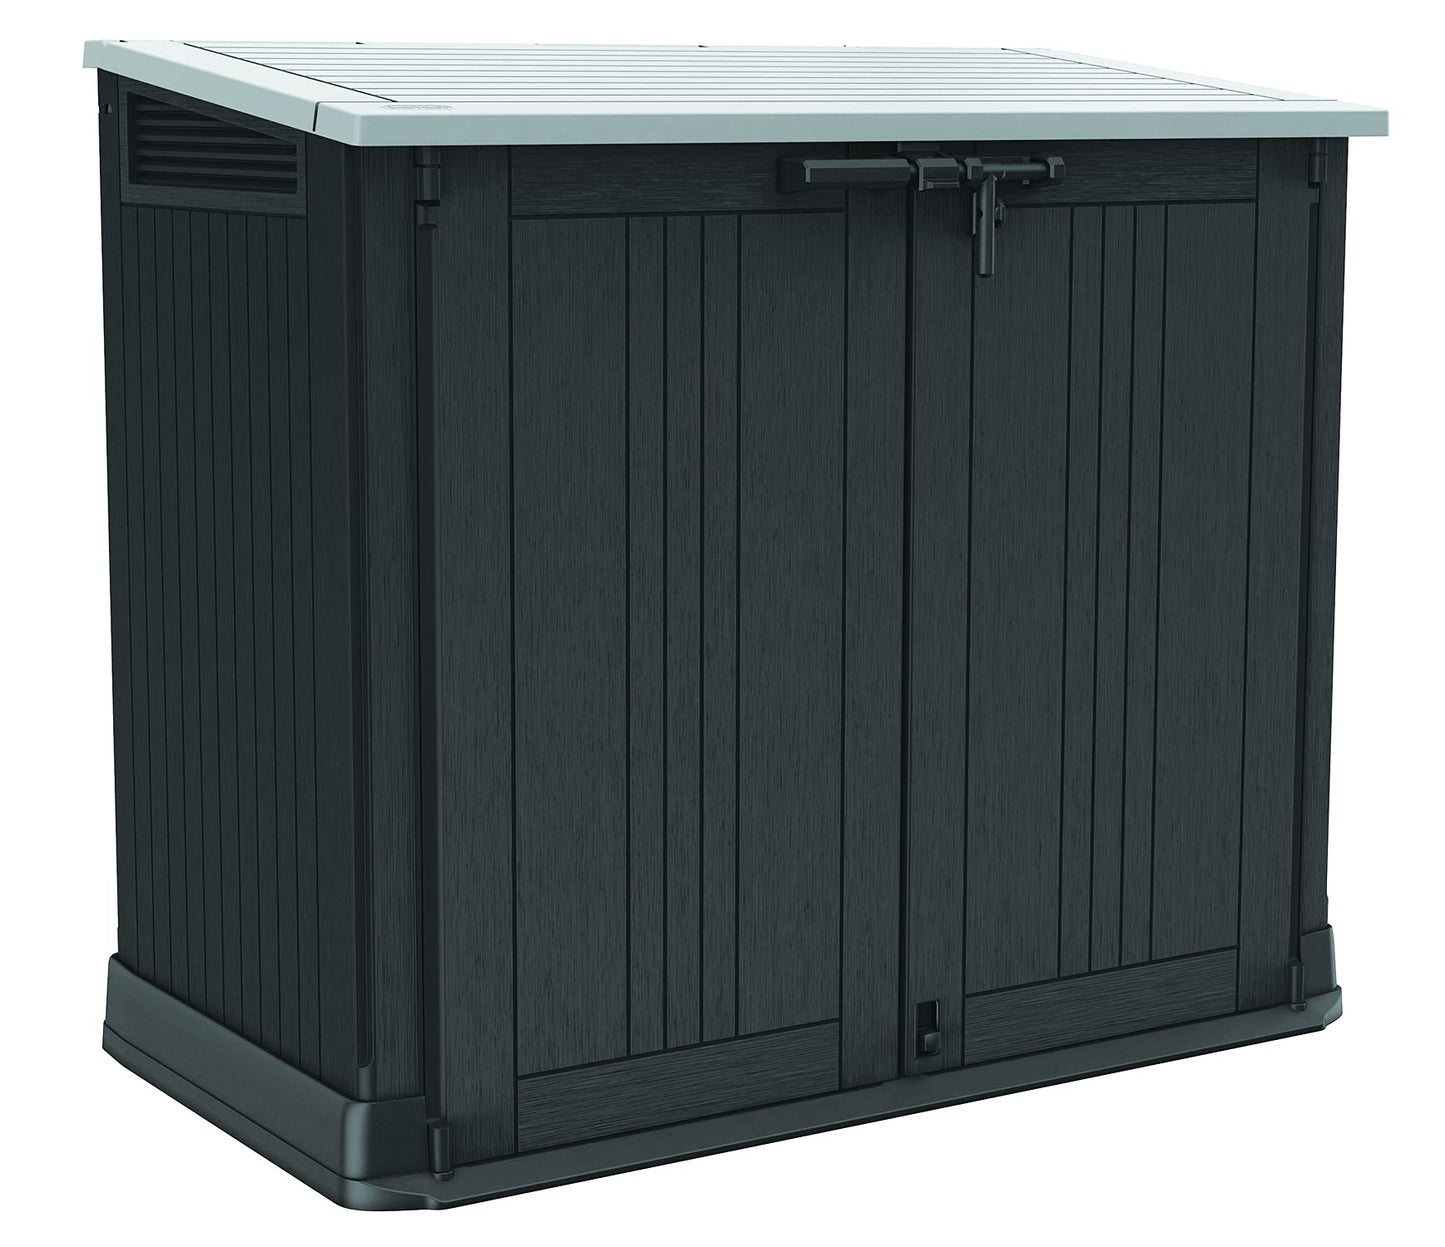 Keter Store-It-Out Prime 4.3 x 2.3 Foot Resin Outdoor Storage Shed with Easy Lift Hinges,Black & Solana 70 Gallon Storage Bench Deck Box for Patio Furniture,Front Porch Decor and Outdoor Seating Grey